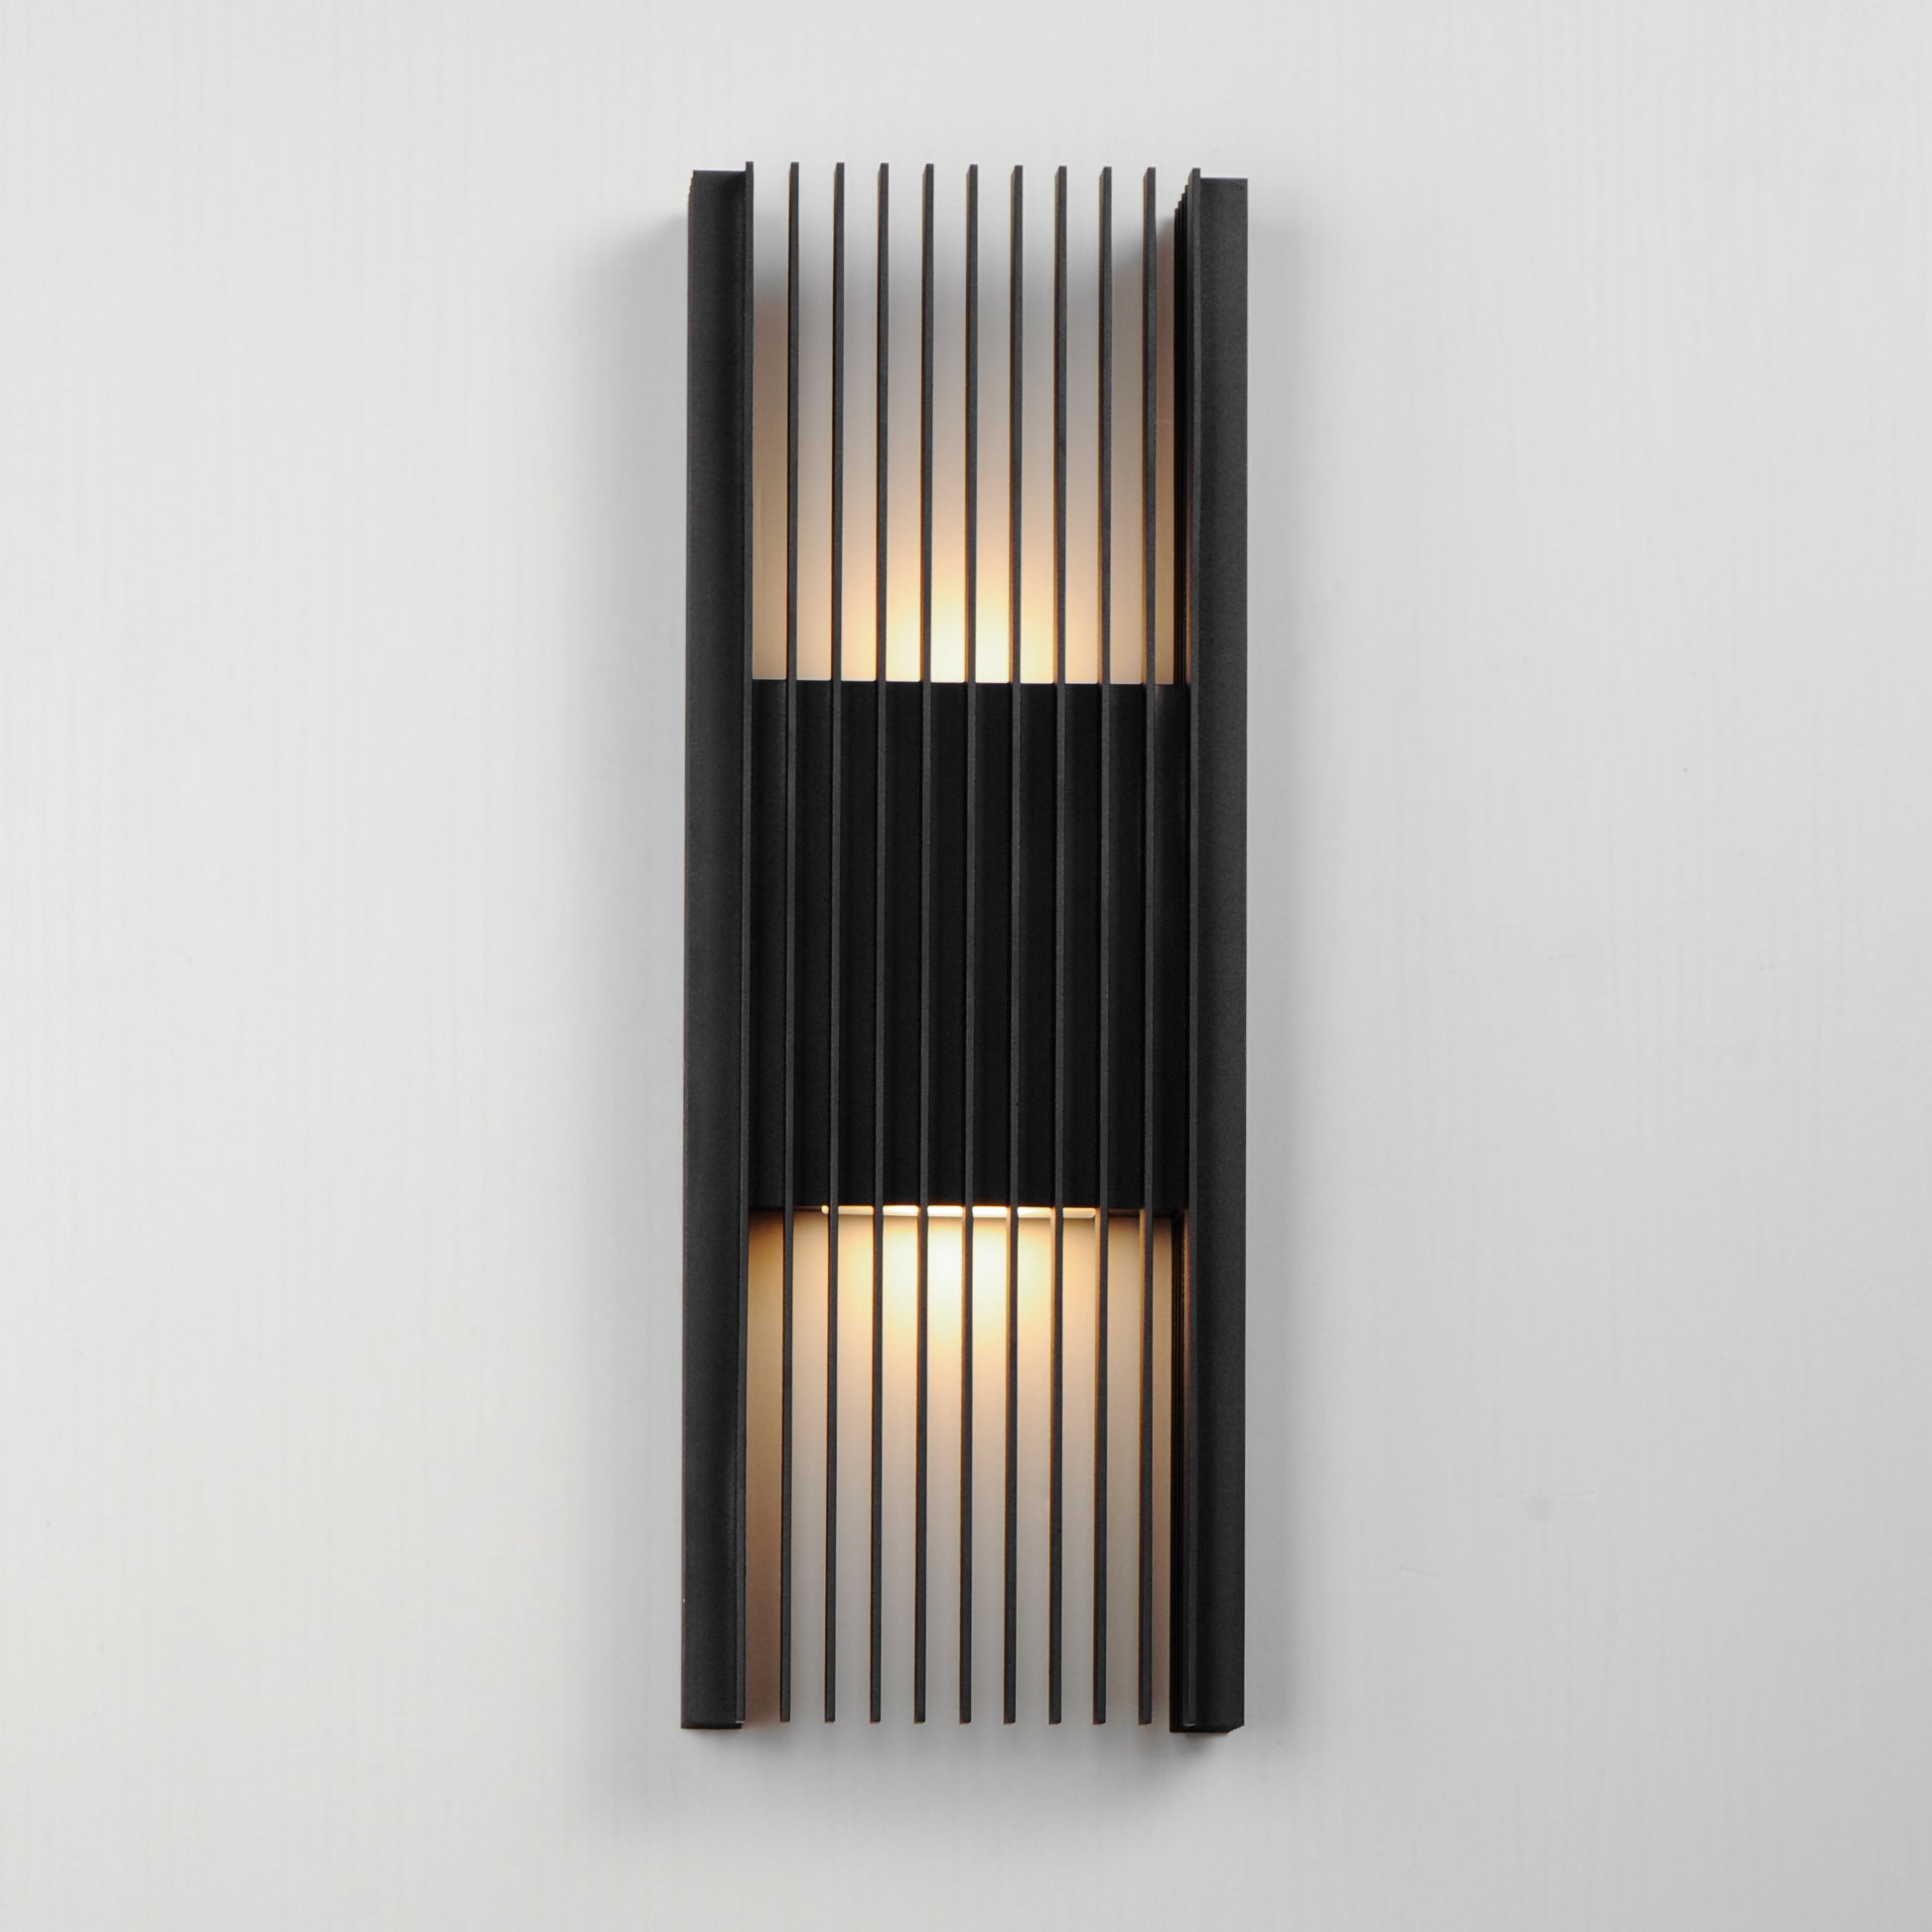 ET2 Rampart Large LED Outdoor Wall Sconce